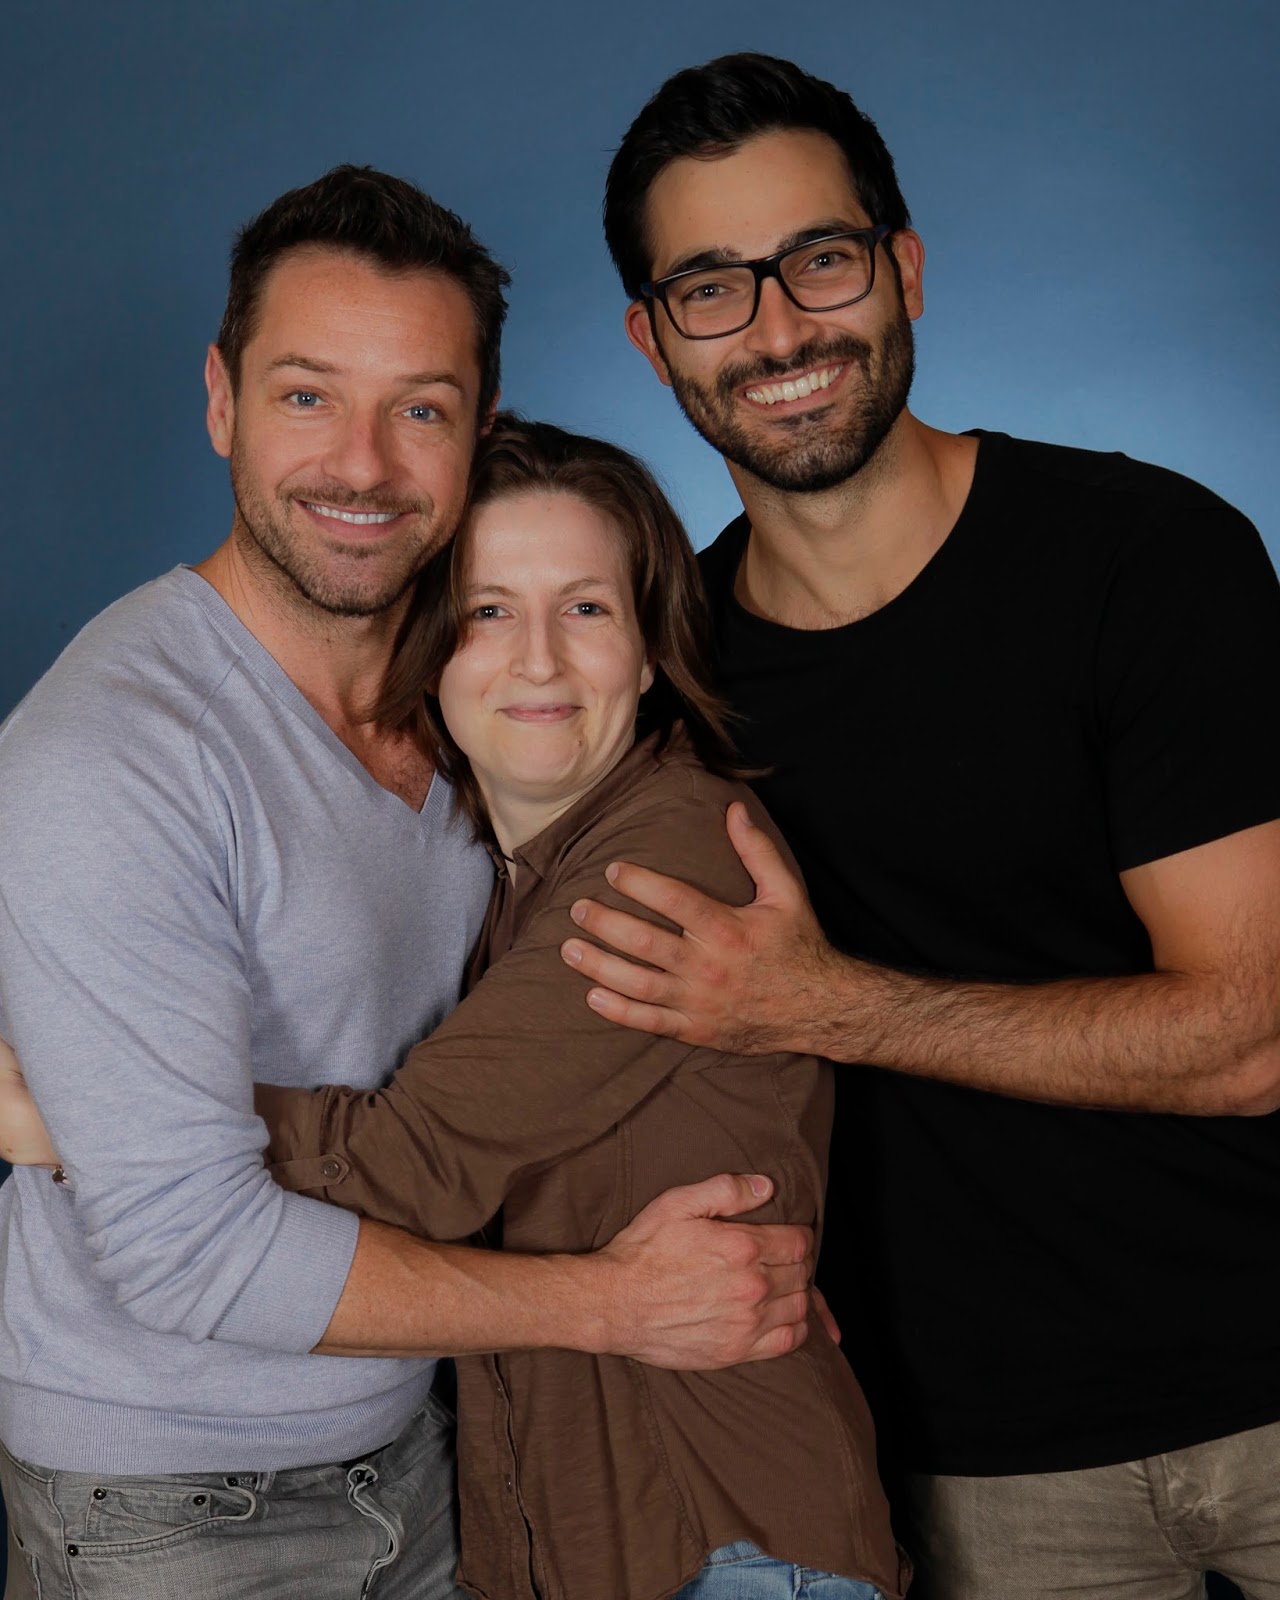 I was in a hunk sandwich with Ian Bohen, Peter Hale from Teen Wolf, and Tyl...